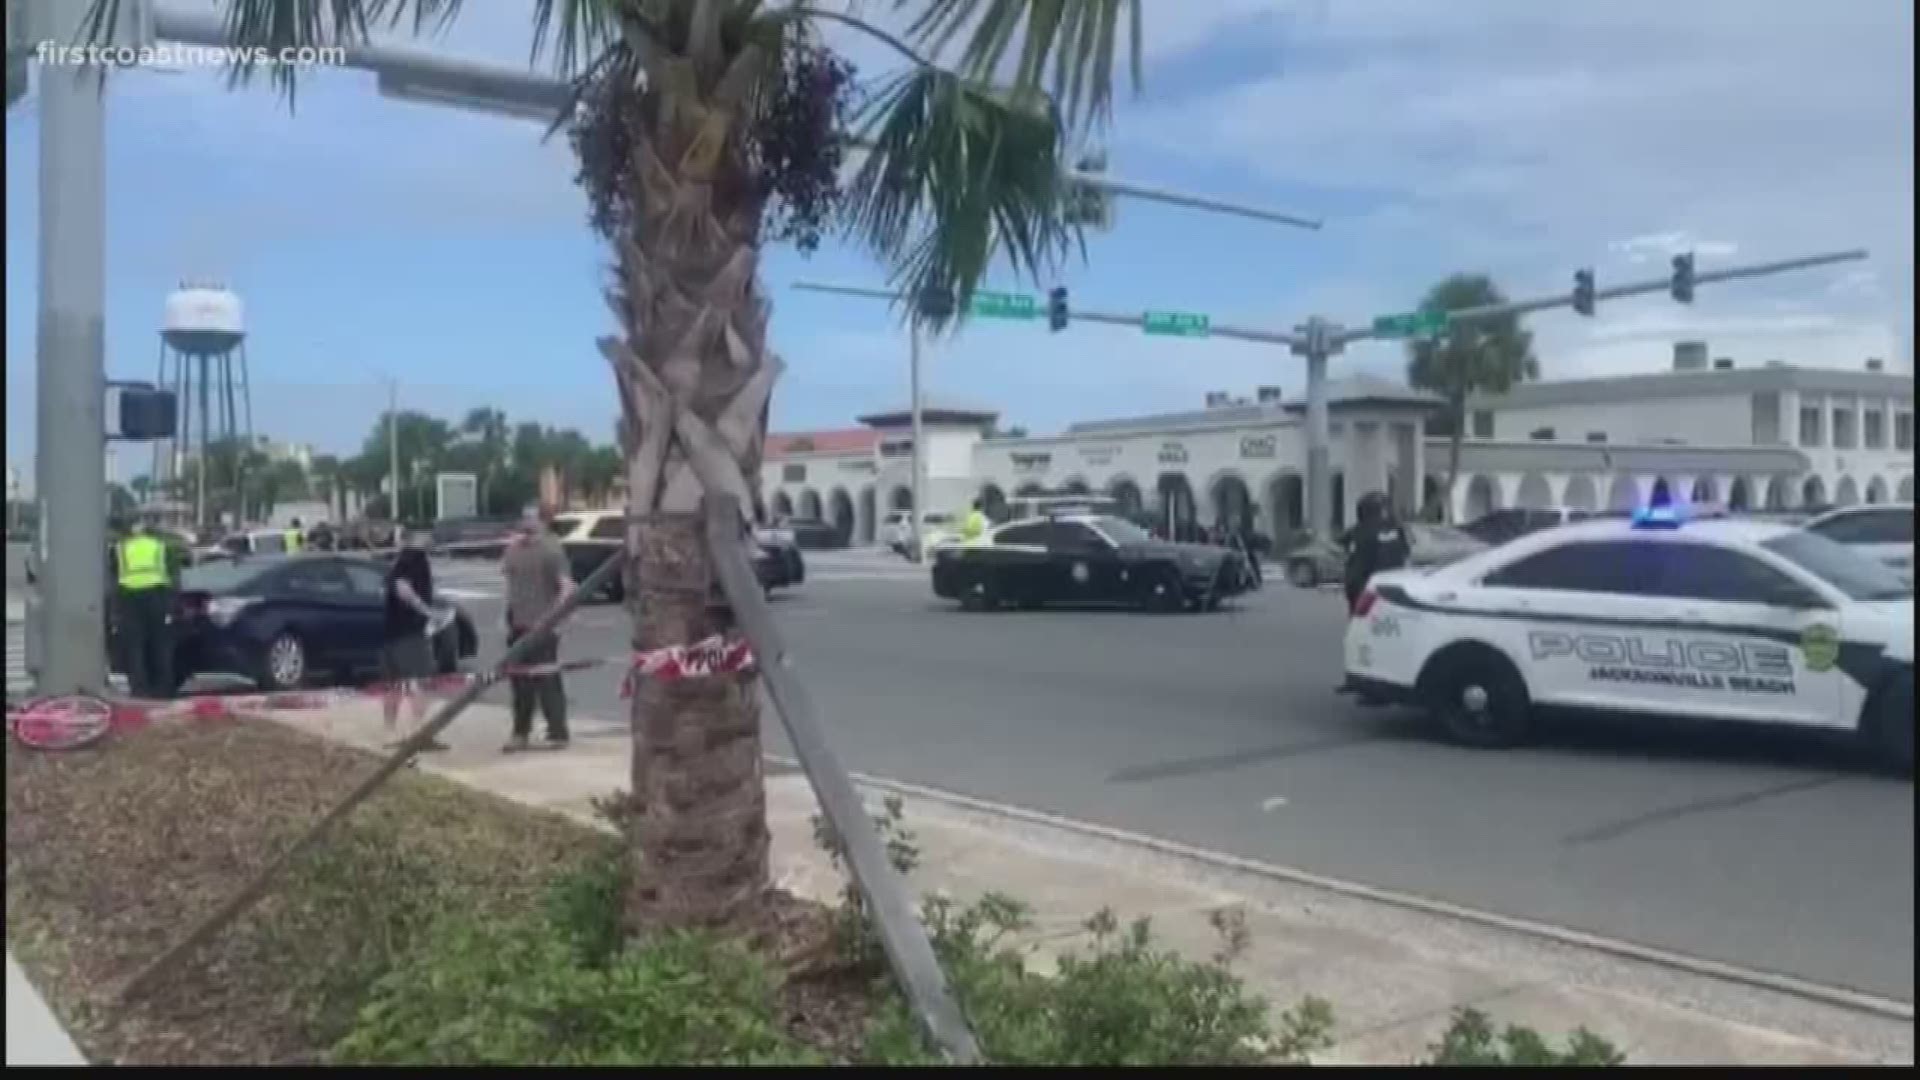 A woman is suffering from serious injuries after getting pinned between a car and a pole during a crash in Jax Beach on Saturday, according to first responders.